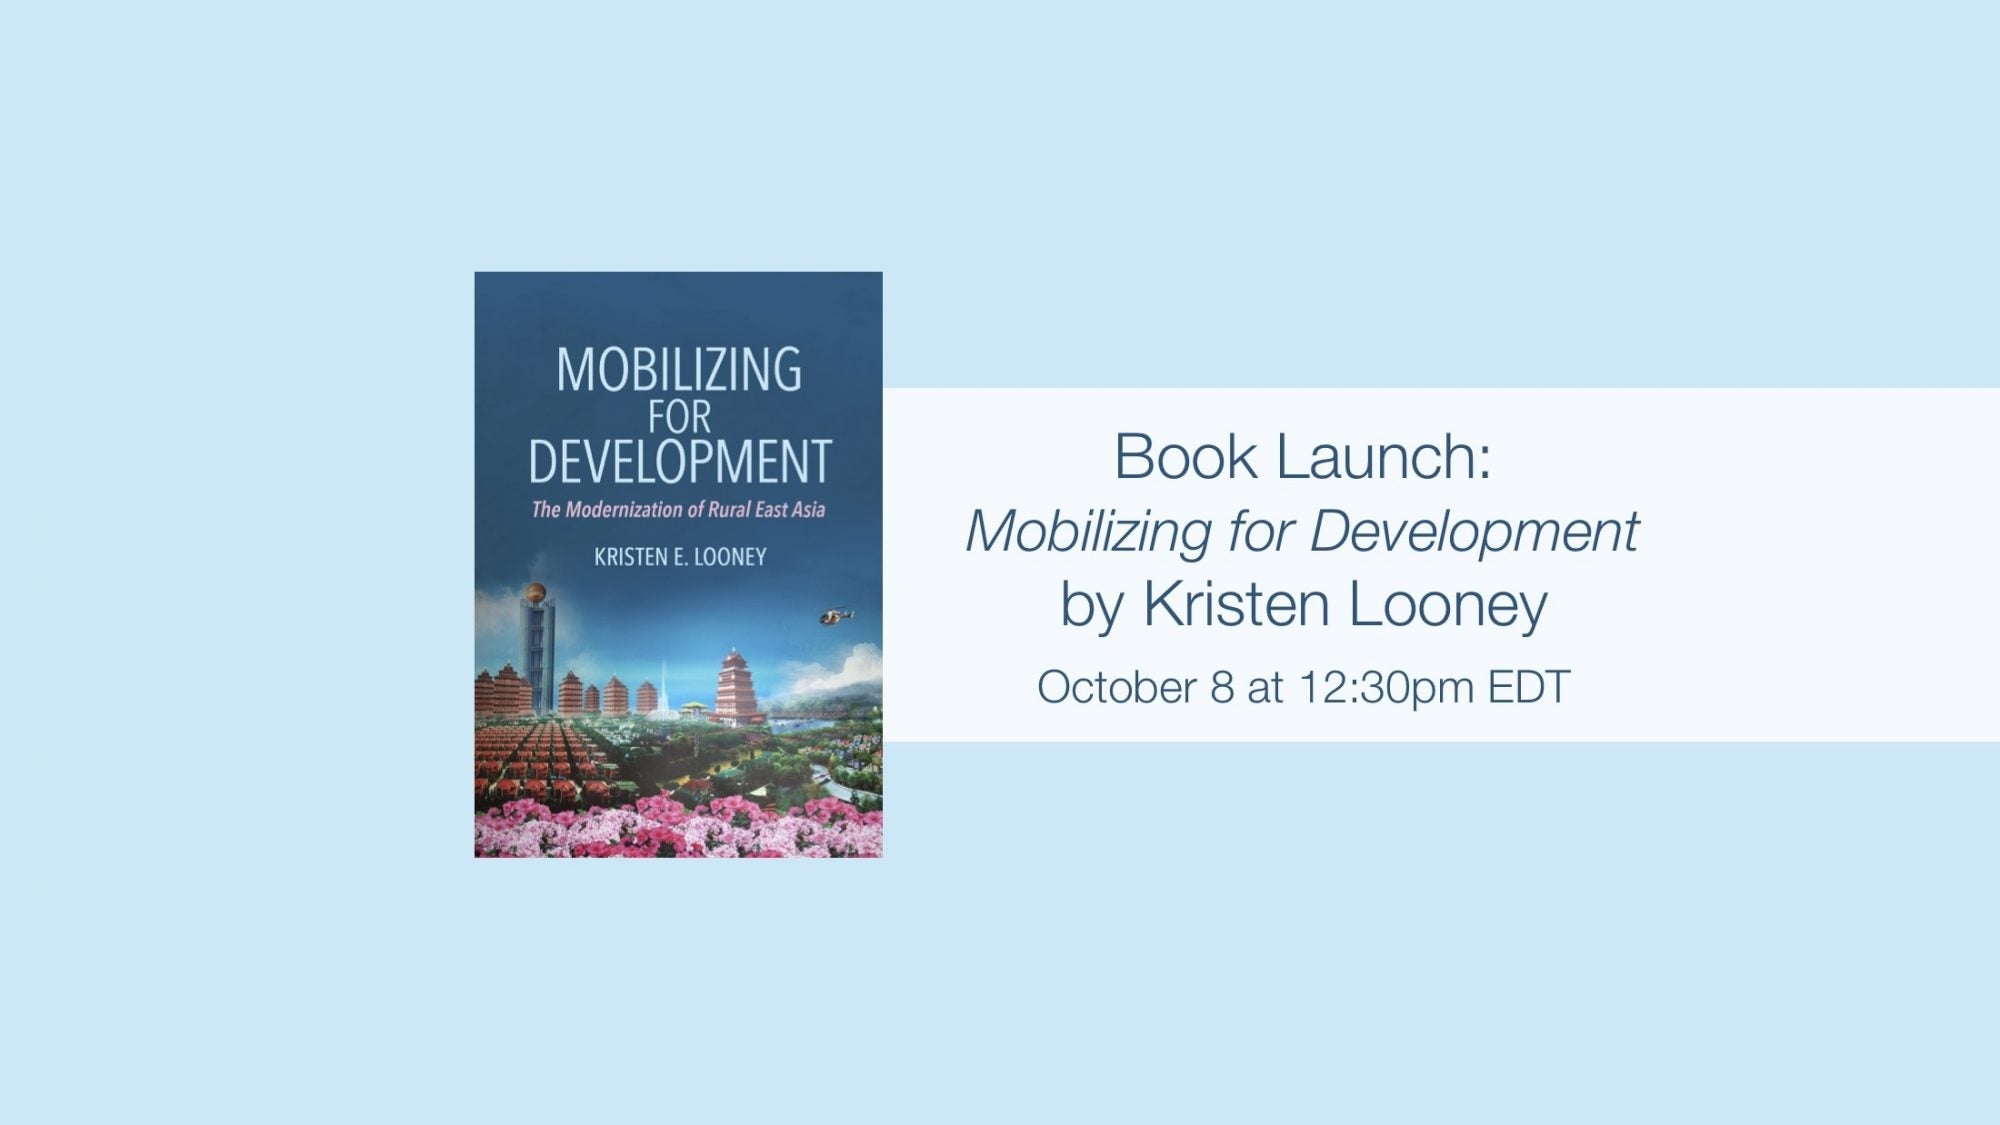 Book Launch: Mobilizing for Development by Kristen Looney on October 8 at 12:30pm EDT